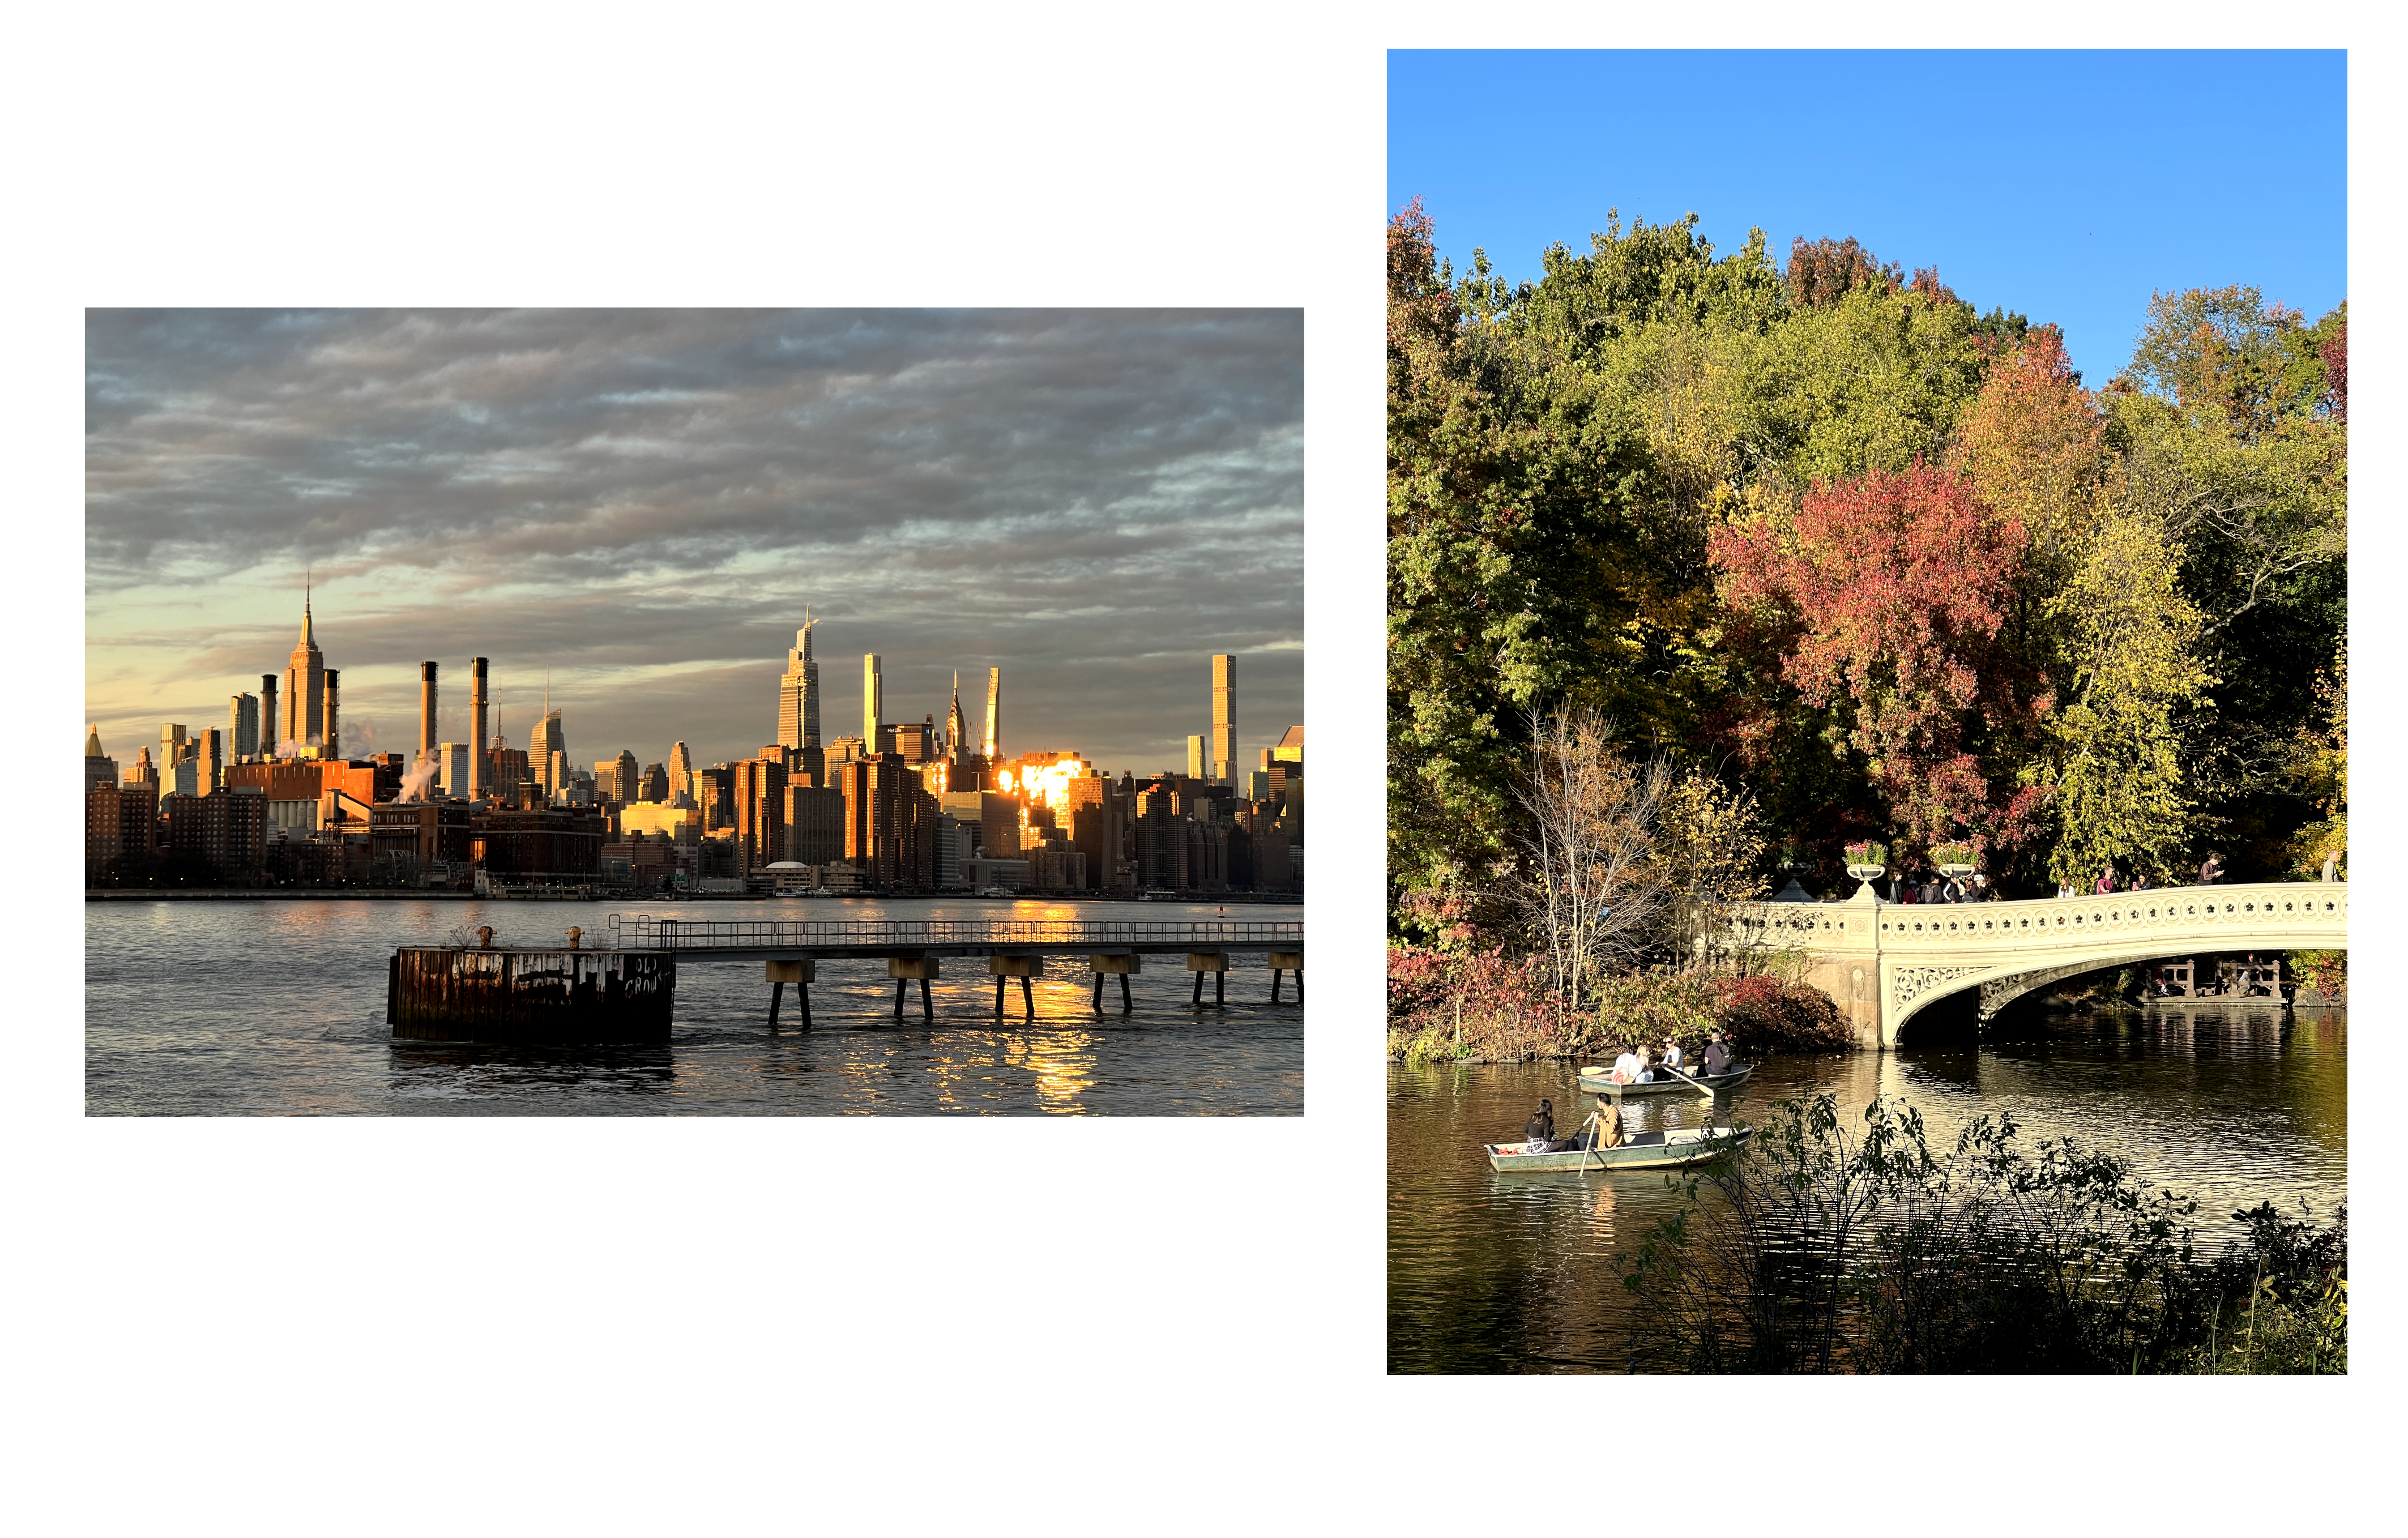 We’ve been living in Williamsburg for the last 6 months, which we think is the greatest neighborhood in the city, but we might be biased ;) Endless strolls along the east river, watching the sun set over Manhattan is never a bad view. For anyone visiting the city, fall is an amazing time of the year, watching the leaves change color. The photo on the right was taken in Central Park in October.